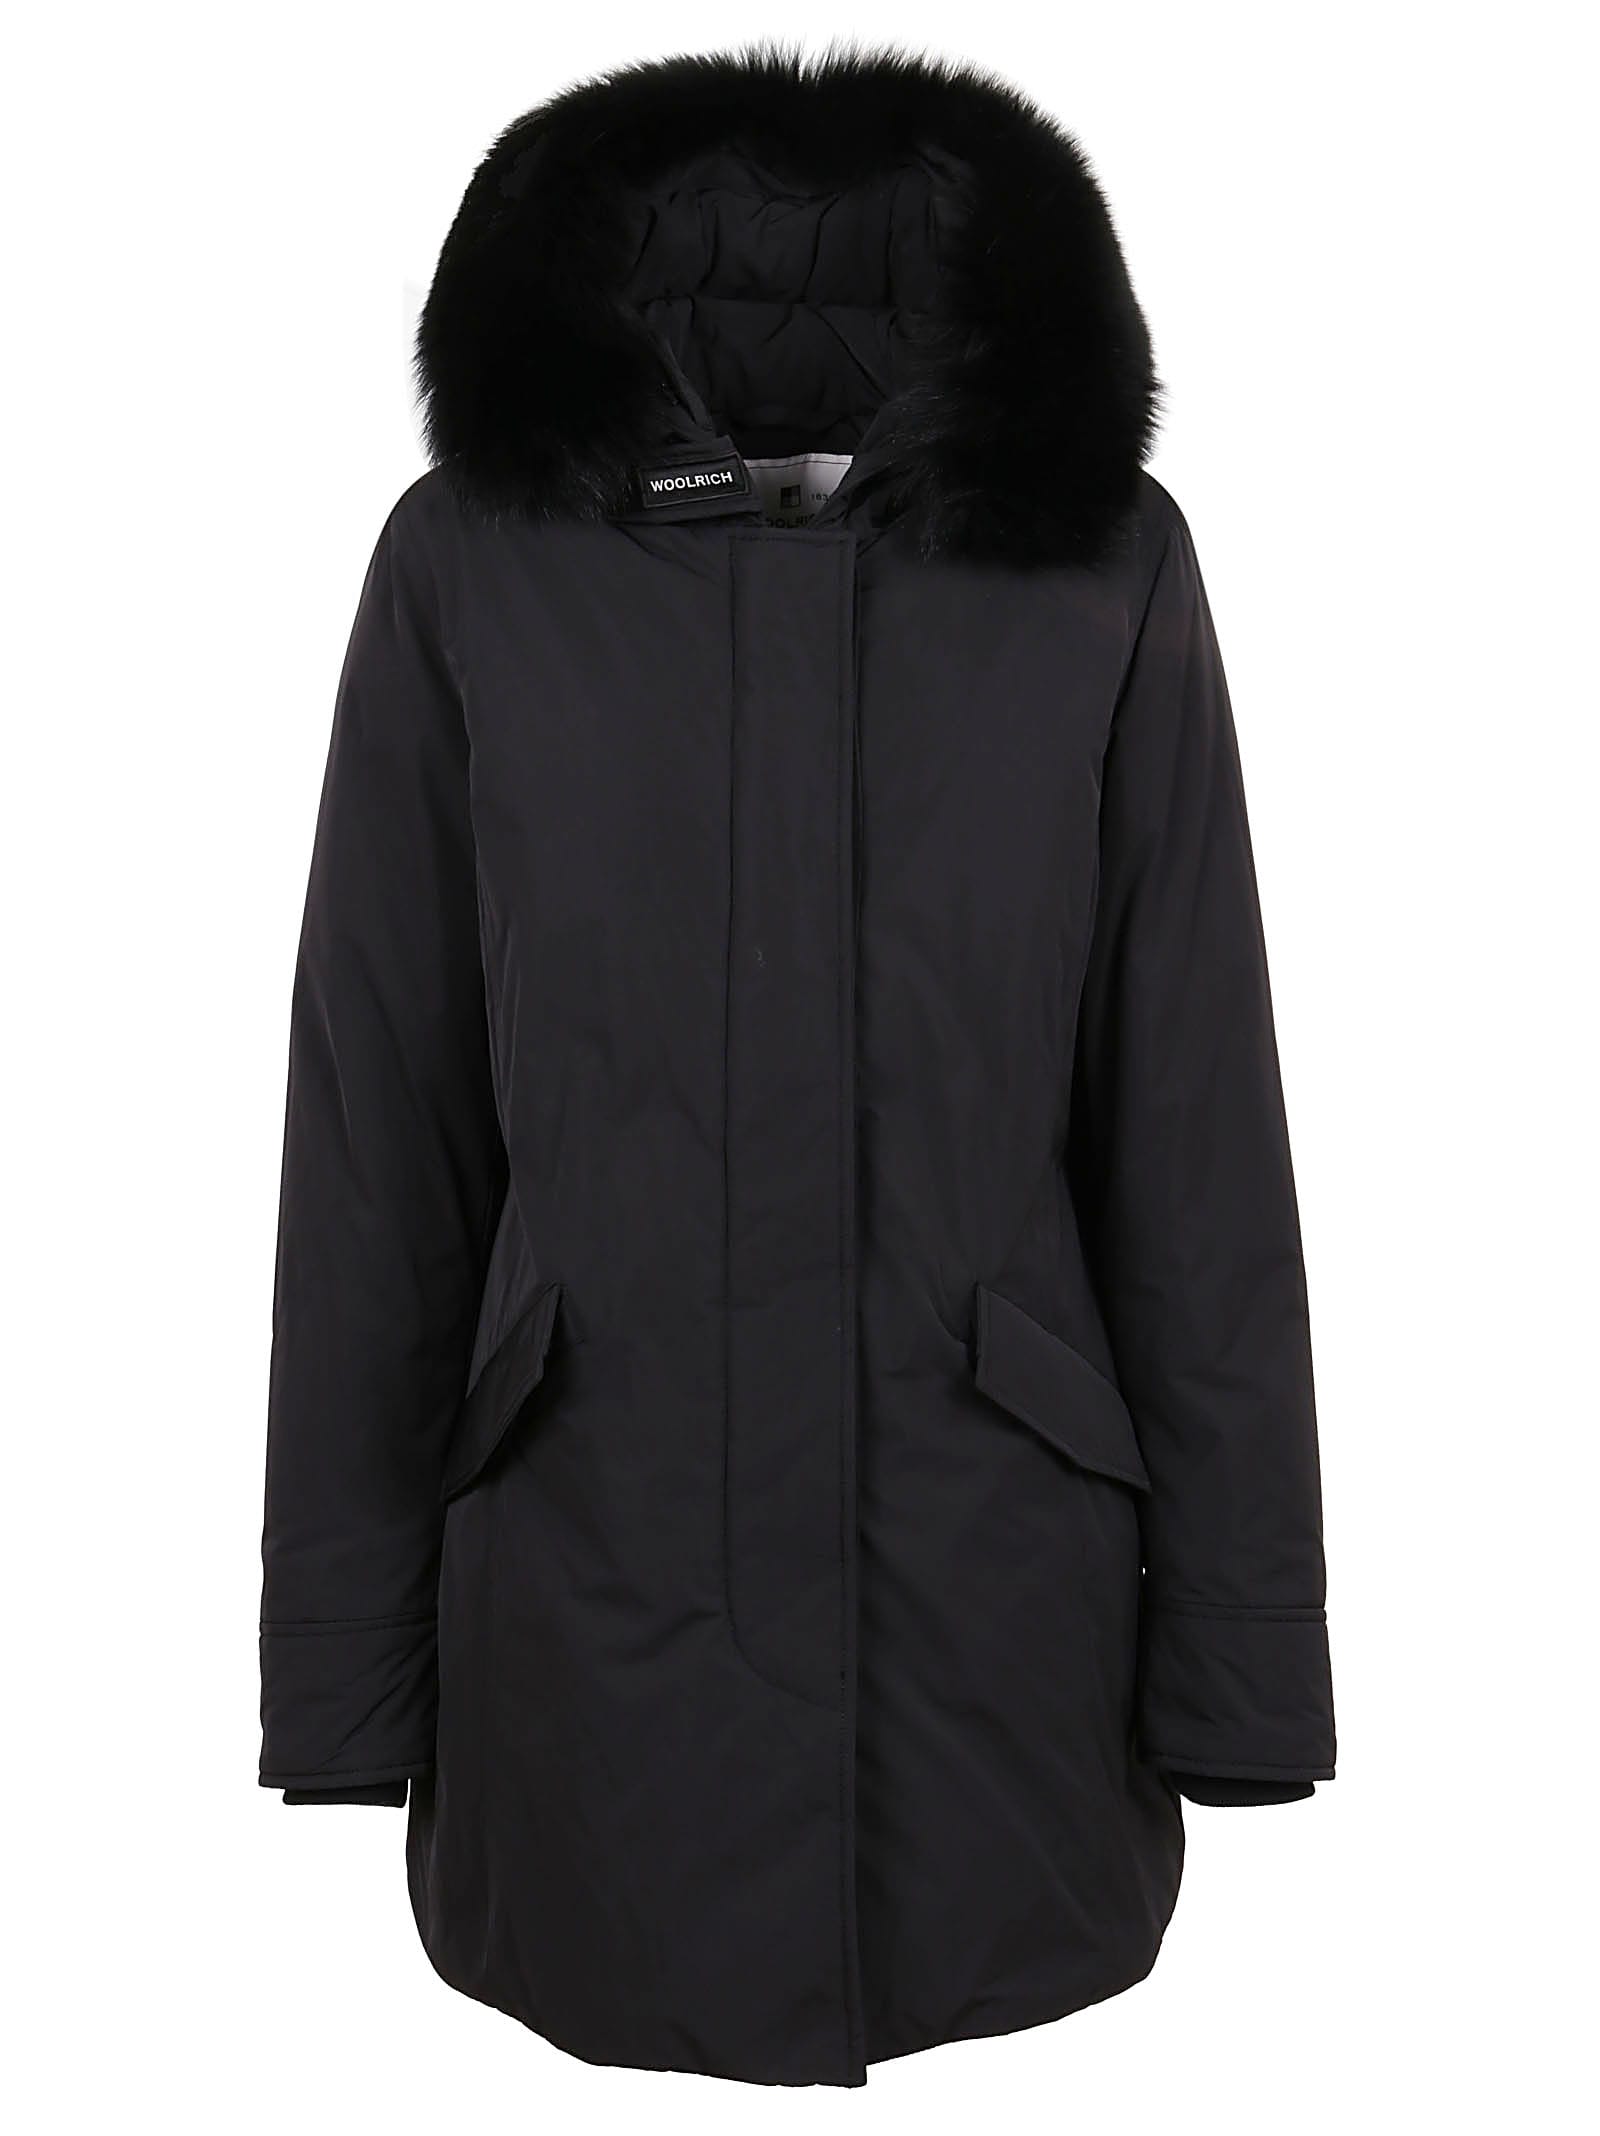 Woolrich Black Technical Fabric Padded Coat